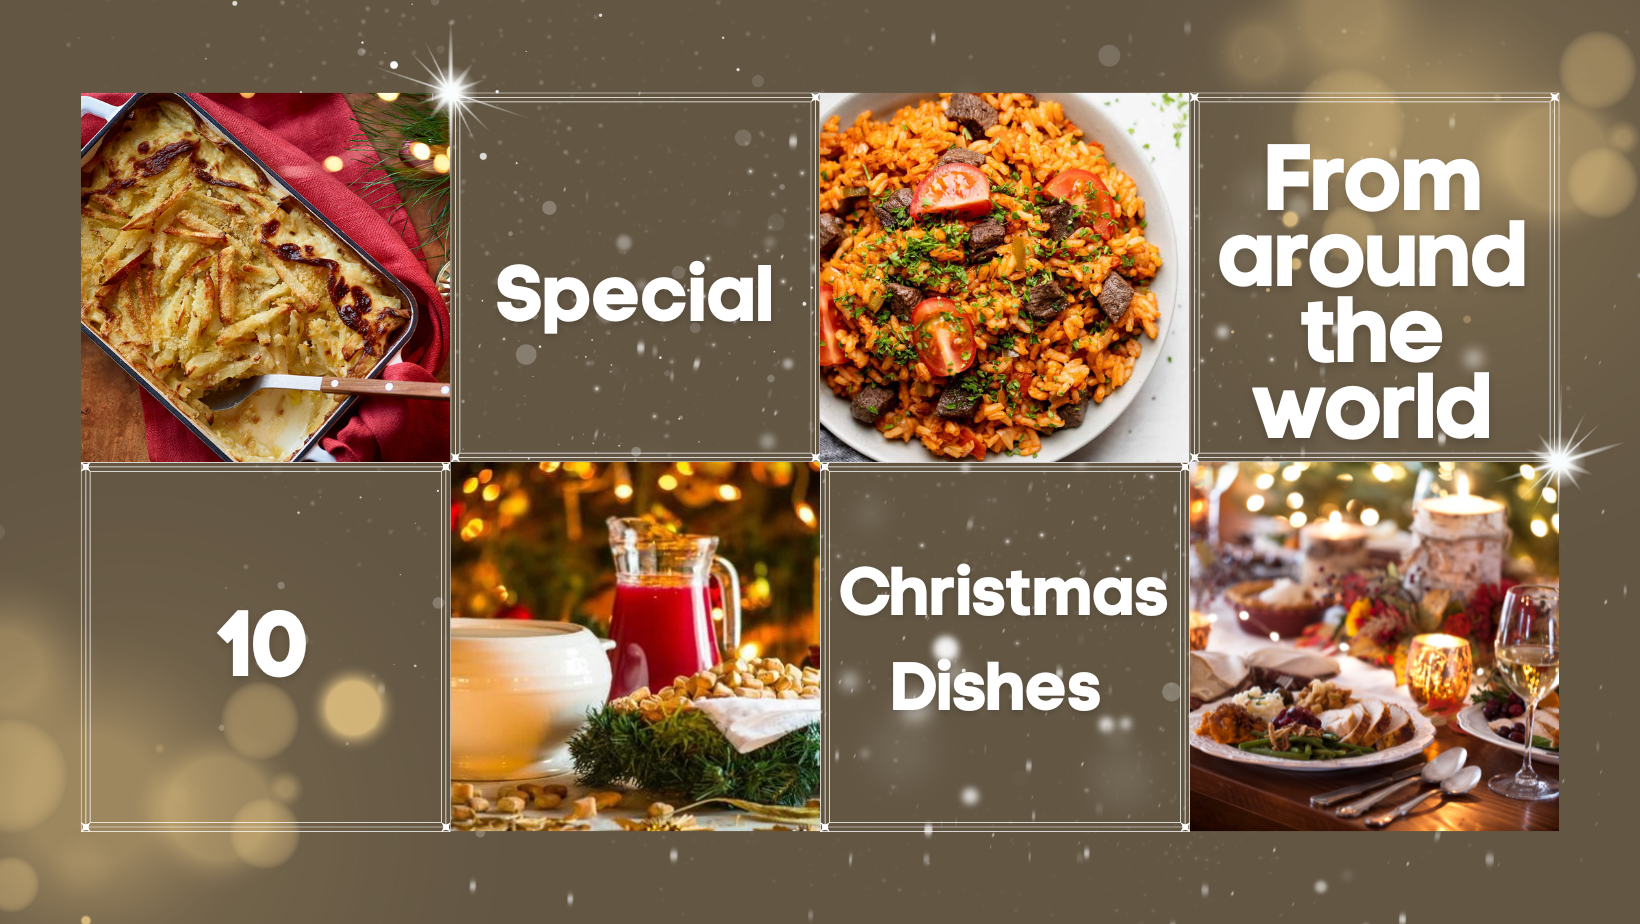 10 Special Christmas Dishes from Around the World